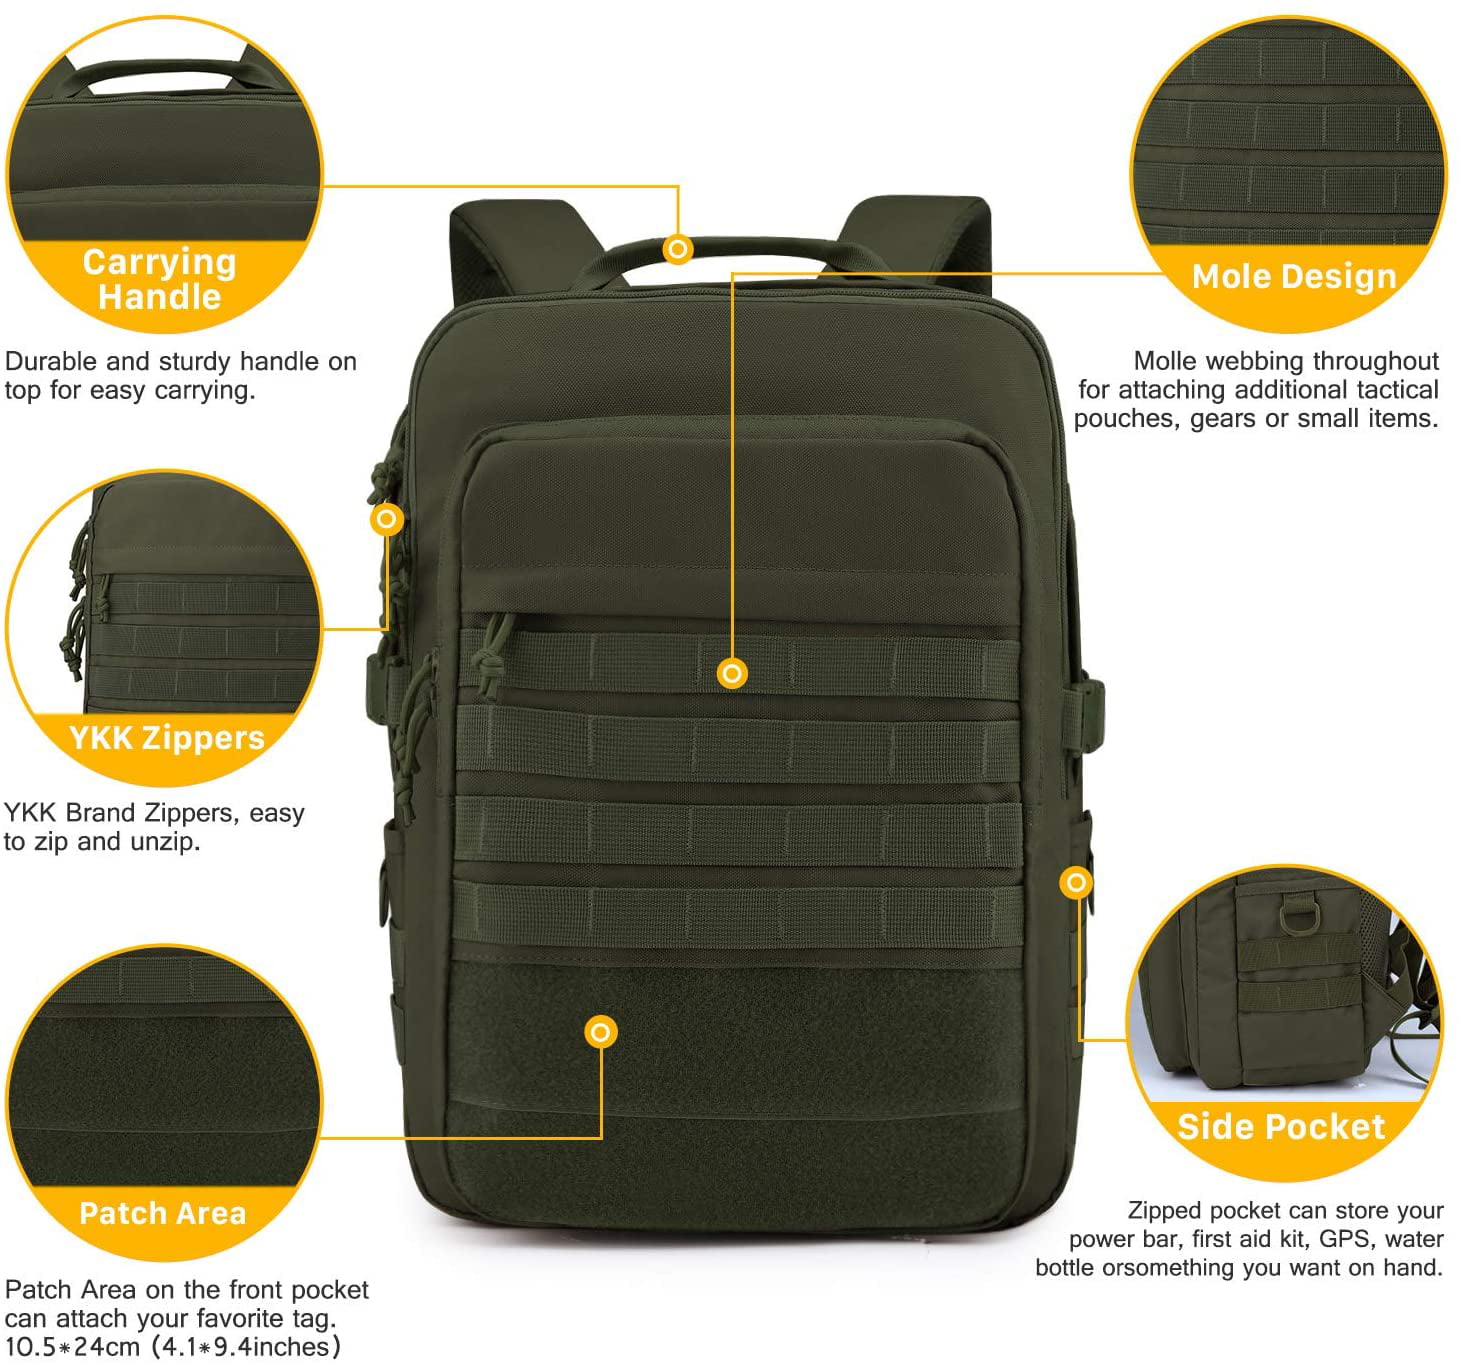 WindTook Laptop Backpack for Women and Men Molle Travel Computer Bag School College Daypack Suits 15.6 Inch Notebook 